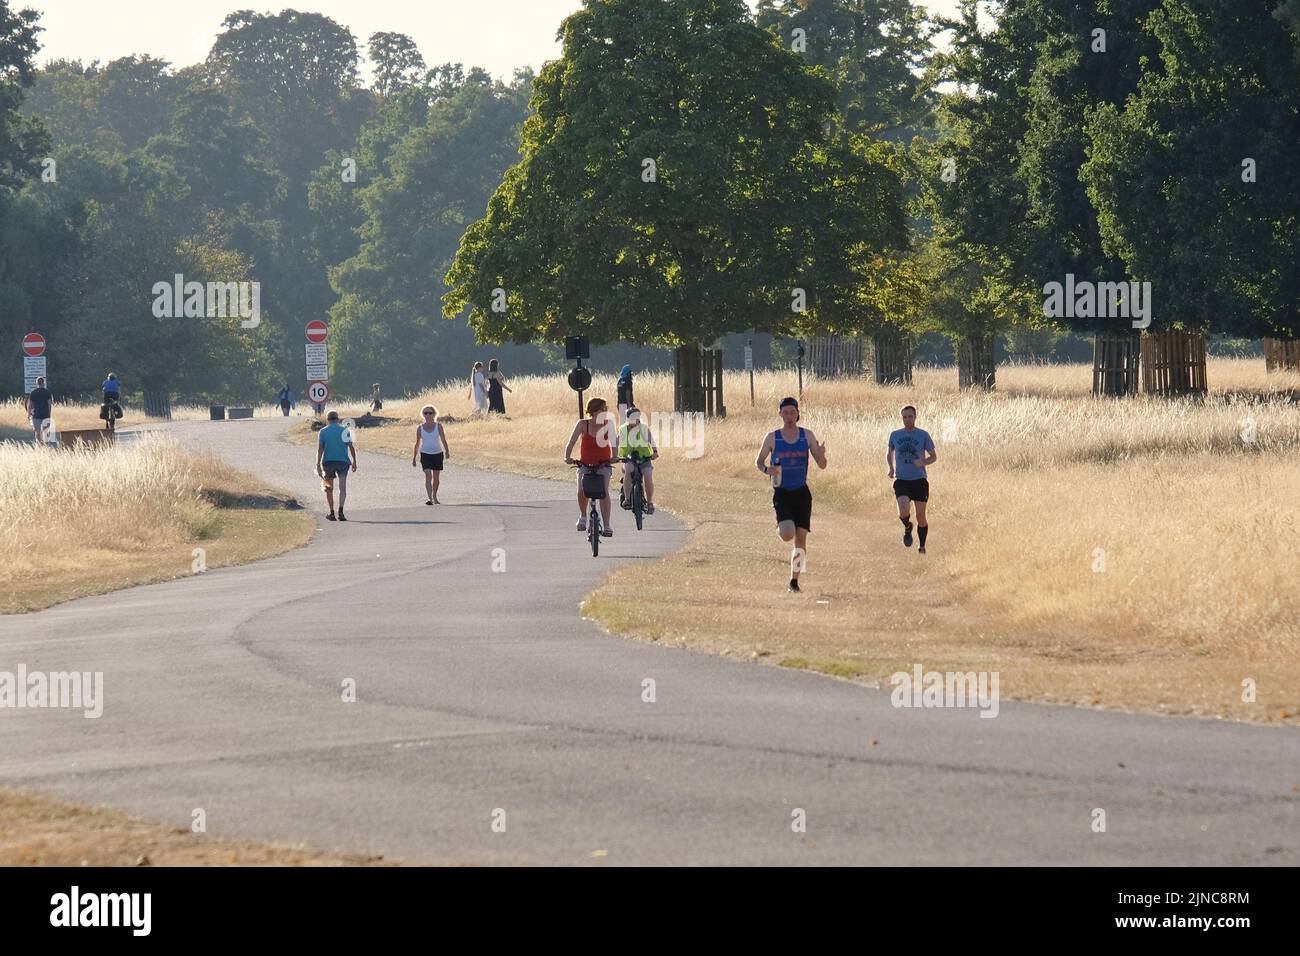 London, UK, 10th Aug, 2022.  Runners, walkers and cyclists pass through Bushy Park in south-west London. After continuing hot, sunny conditions, with the driest July on record, has left the park with large areas of yellowing grass. An Amber Extreme heat warning was issued by the Met Office this week as temmperatures are expected to reach mid-30 degrees celsius.  Credit: Eleventh Hour Photography/Alamy Live News Stock Photo